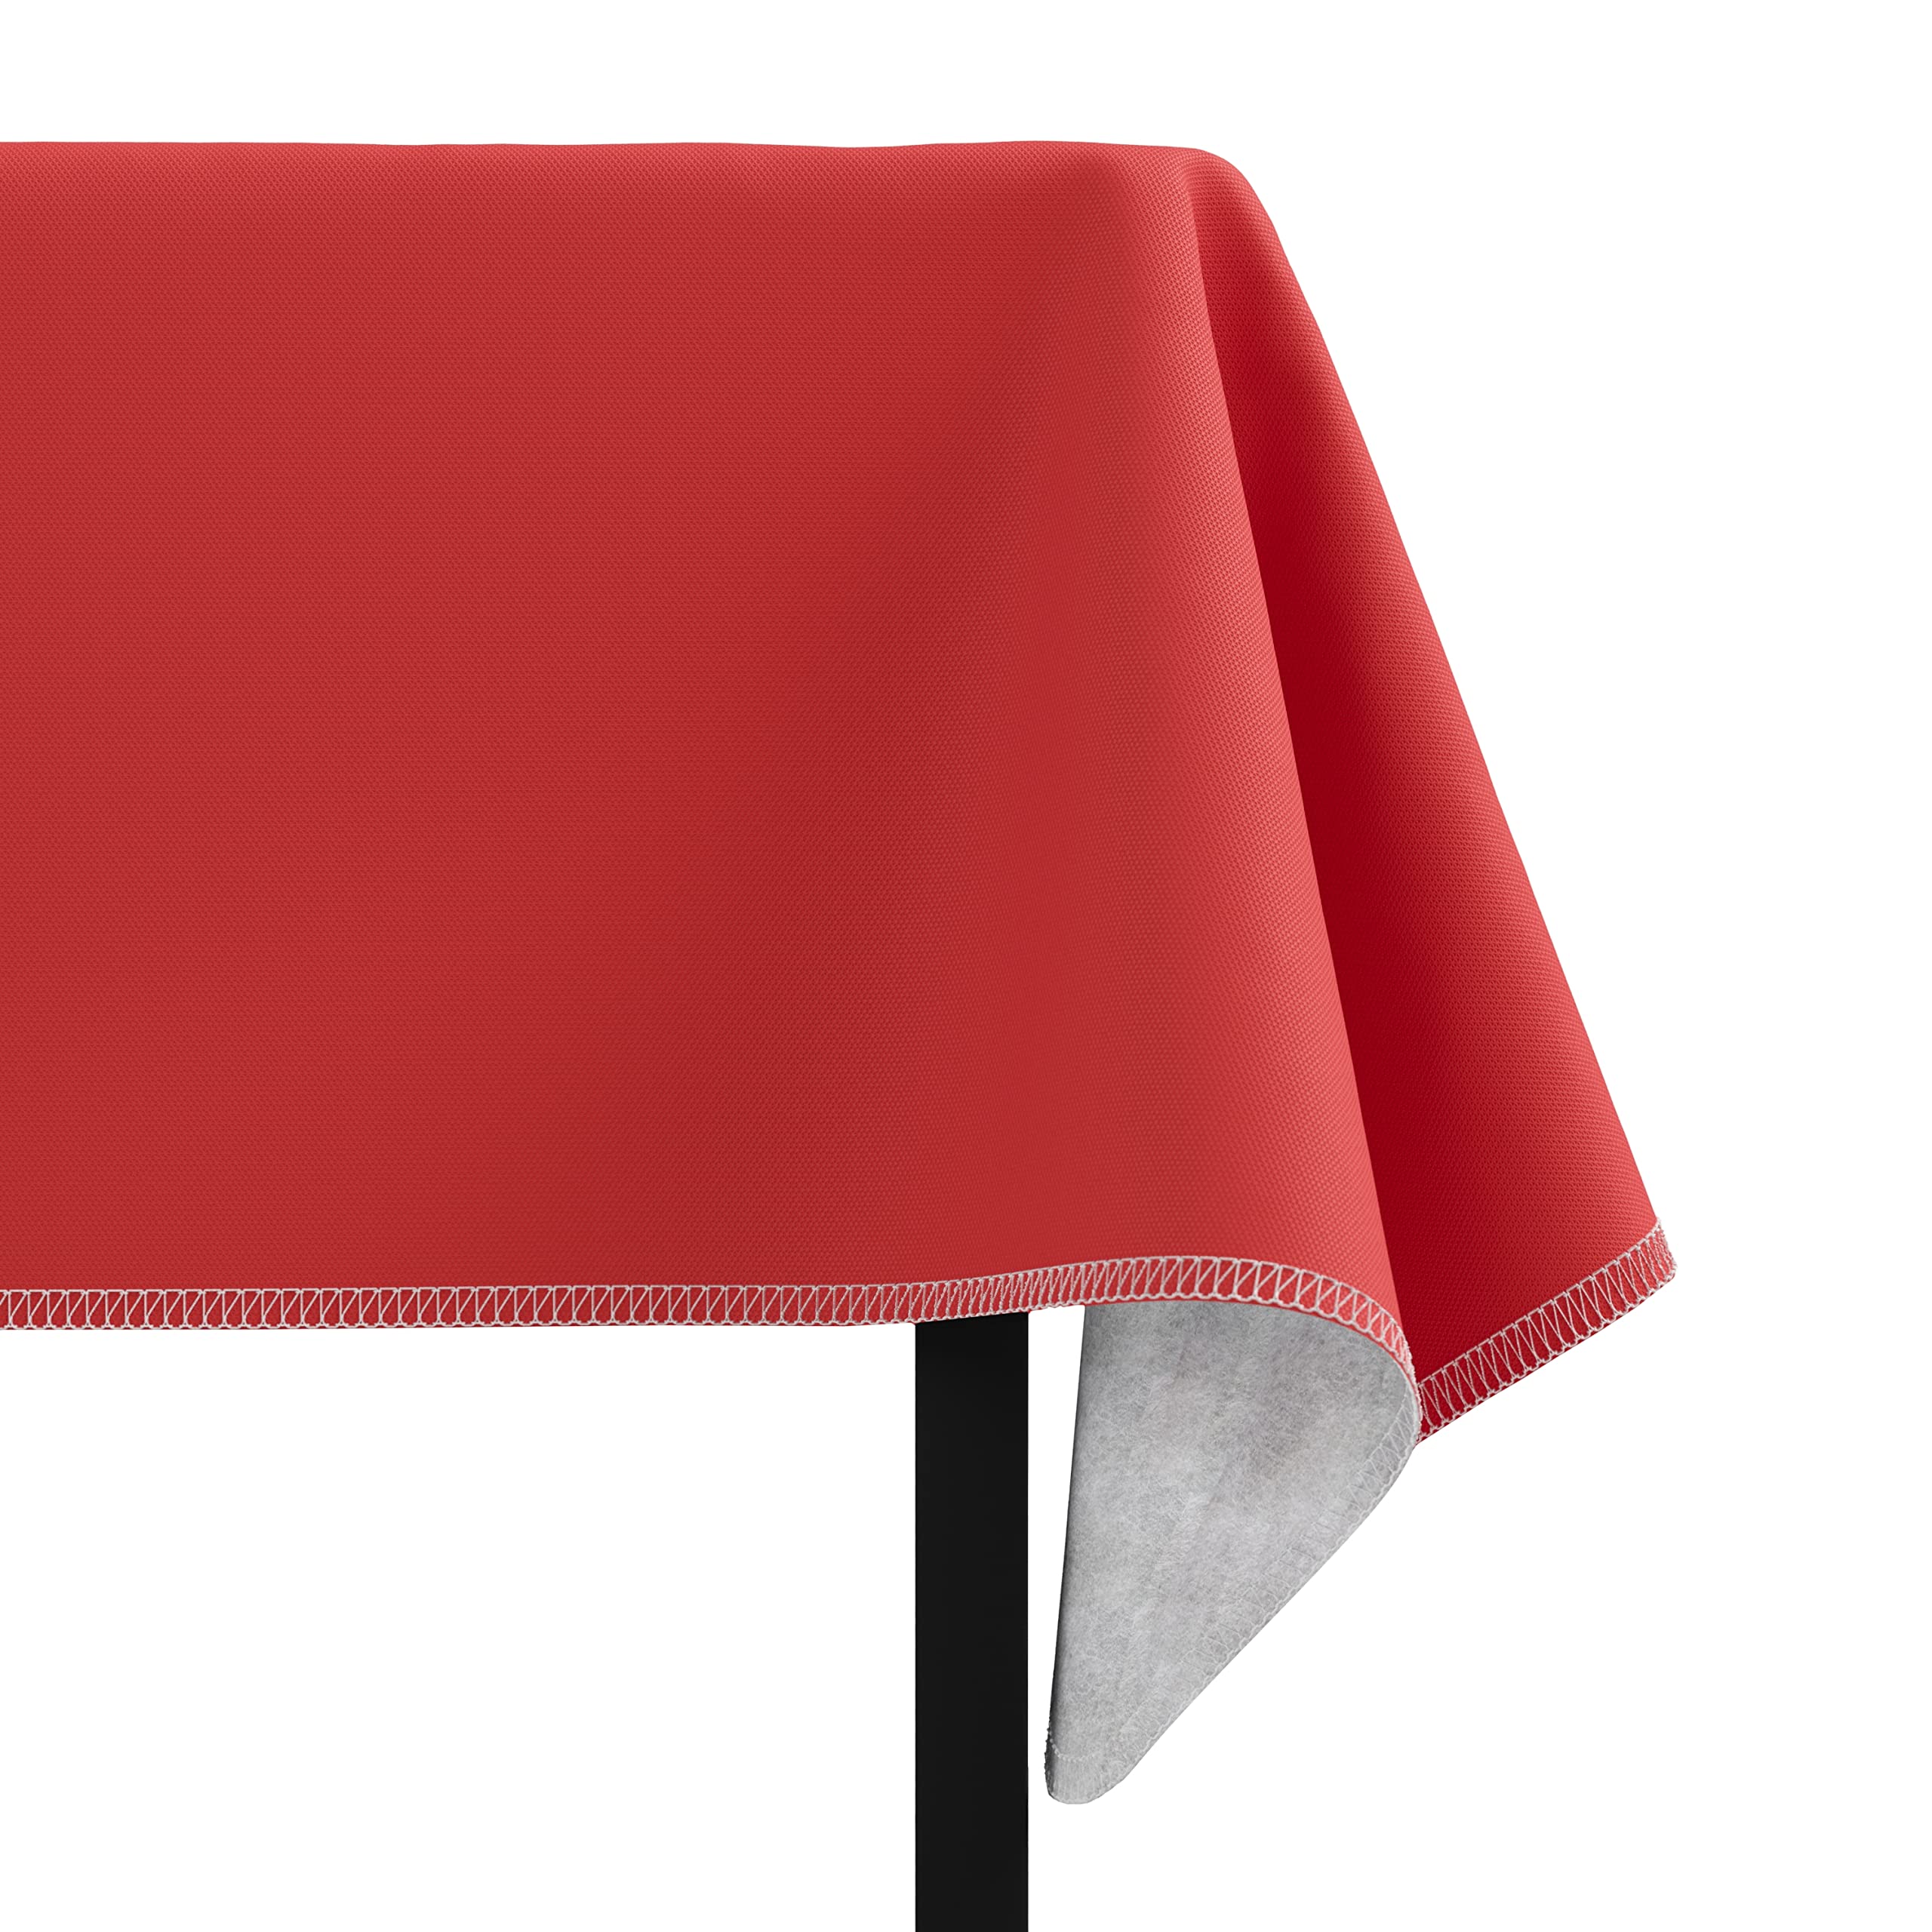 Red Flannel Backed Table Cover 54 In. x 108 In.